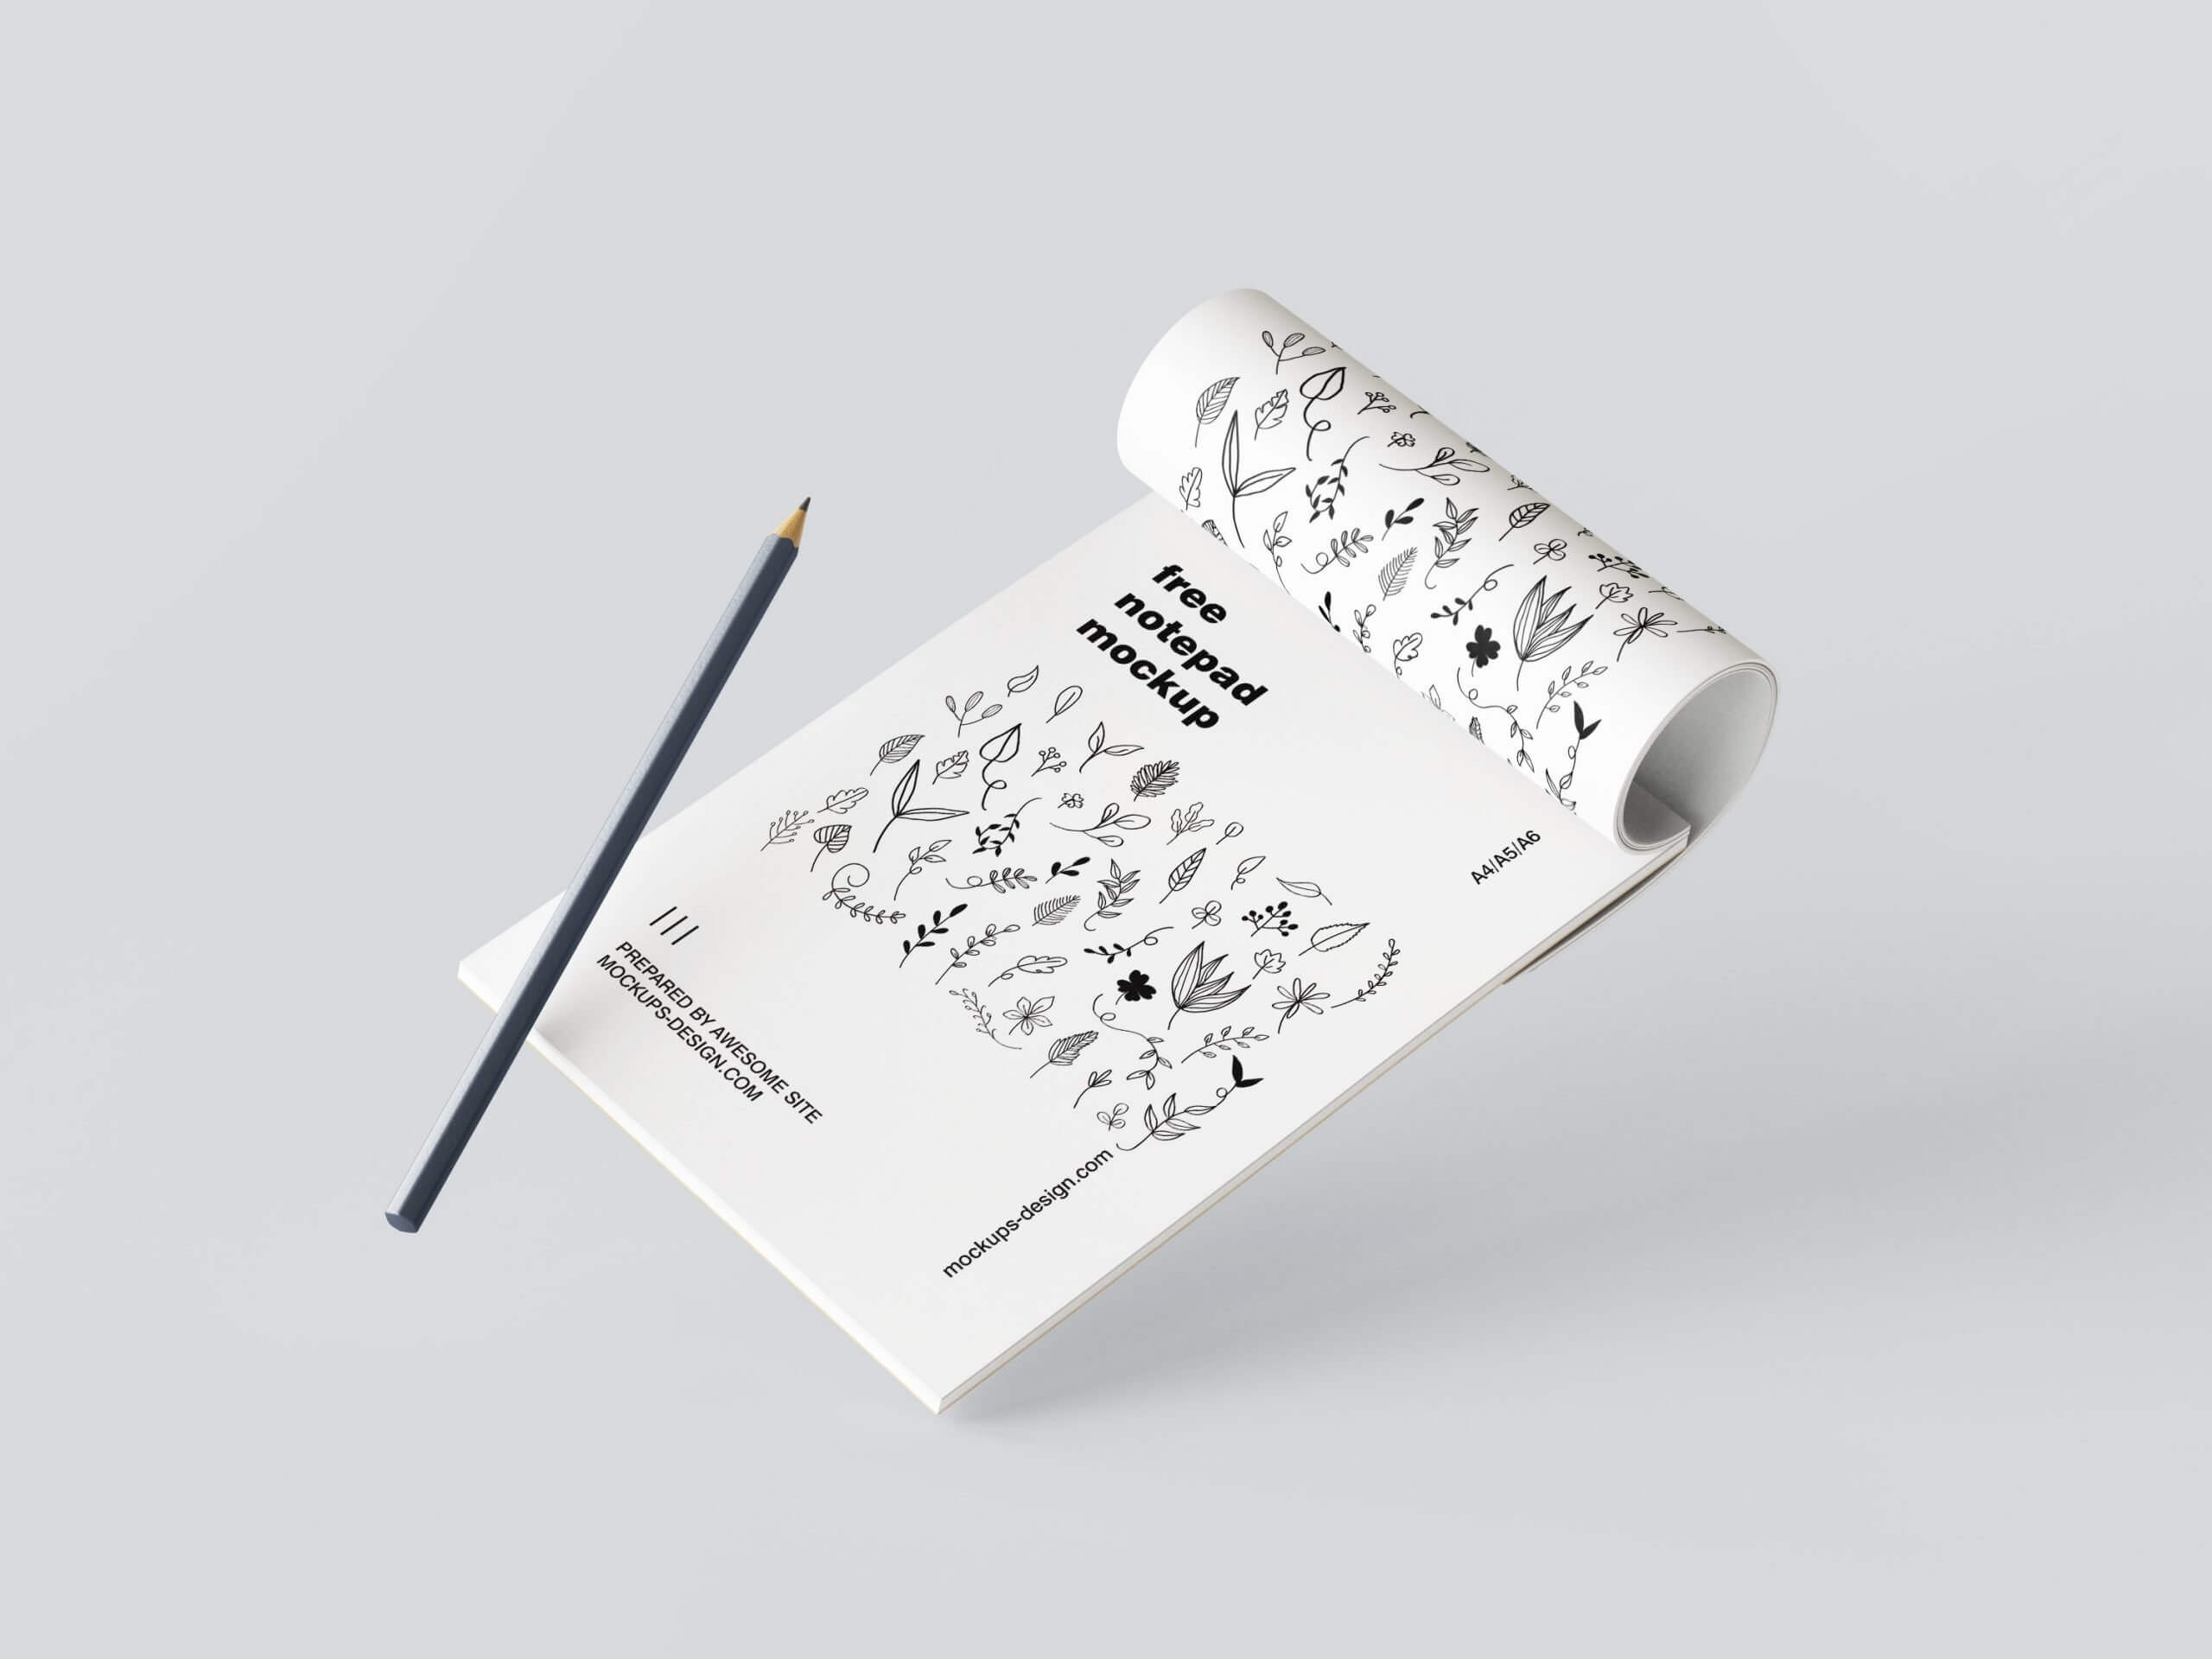 5 Mockups of Notepad with Pencil in Various Perspective Views